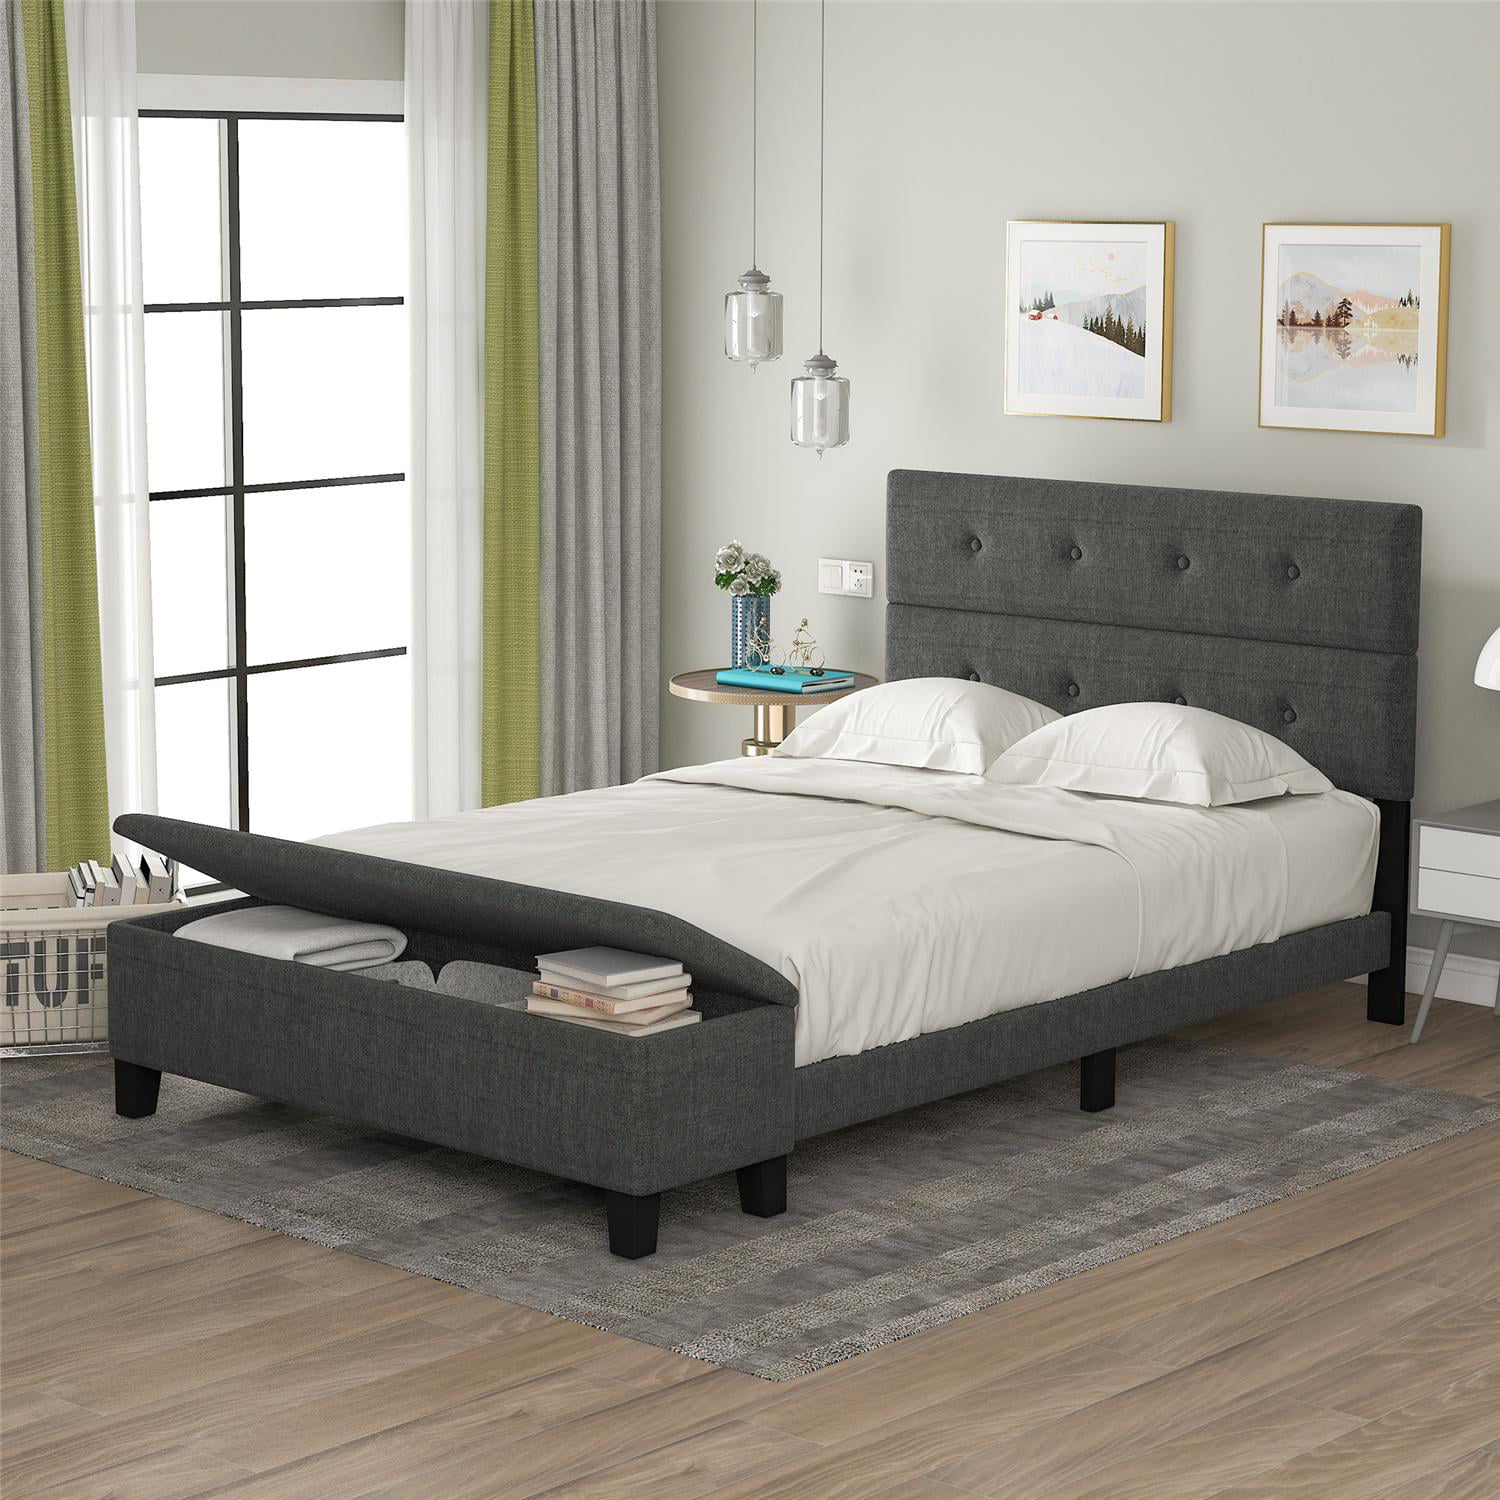 Zinus Upholstered Traditional Tufted Wingback Platform Bed with Wood Slat Support Full